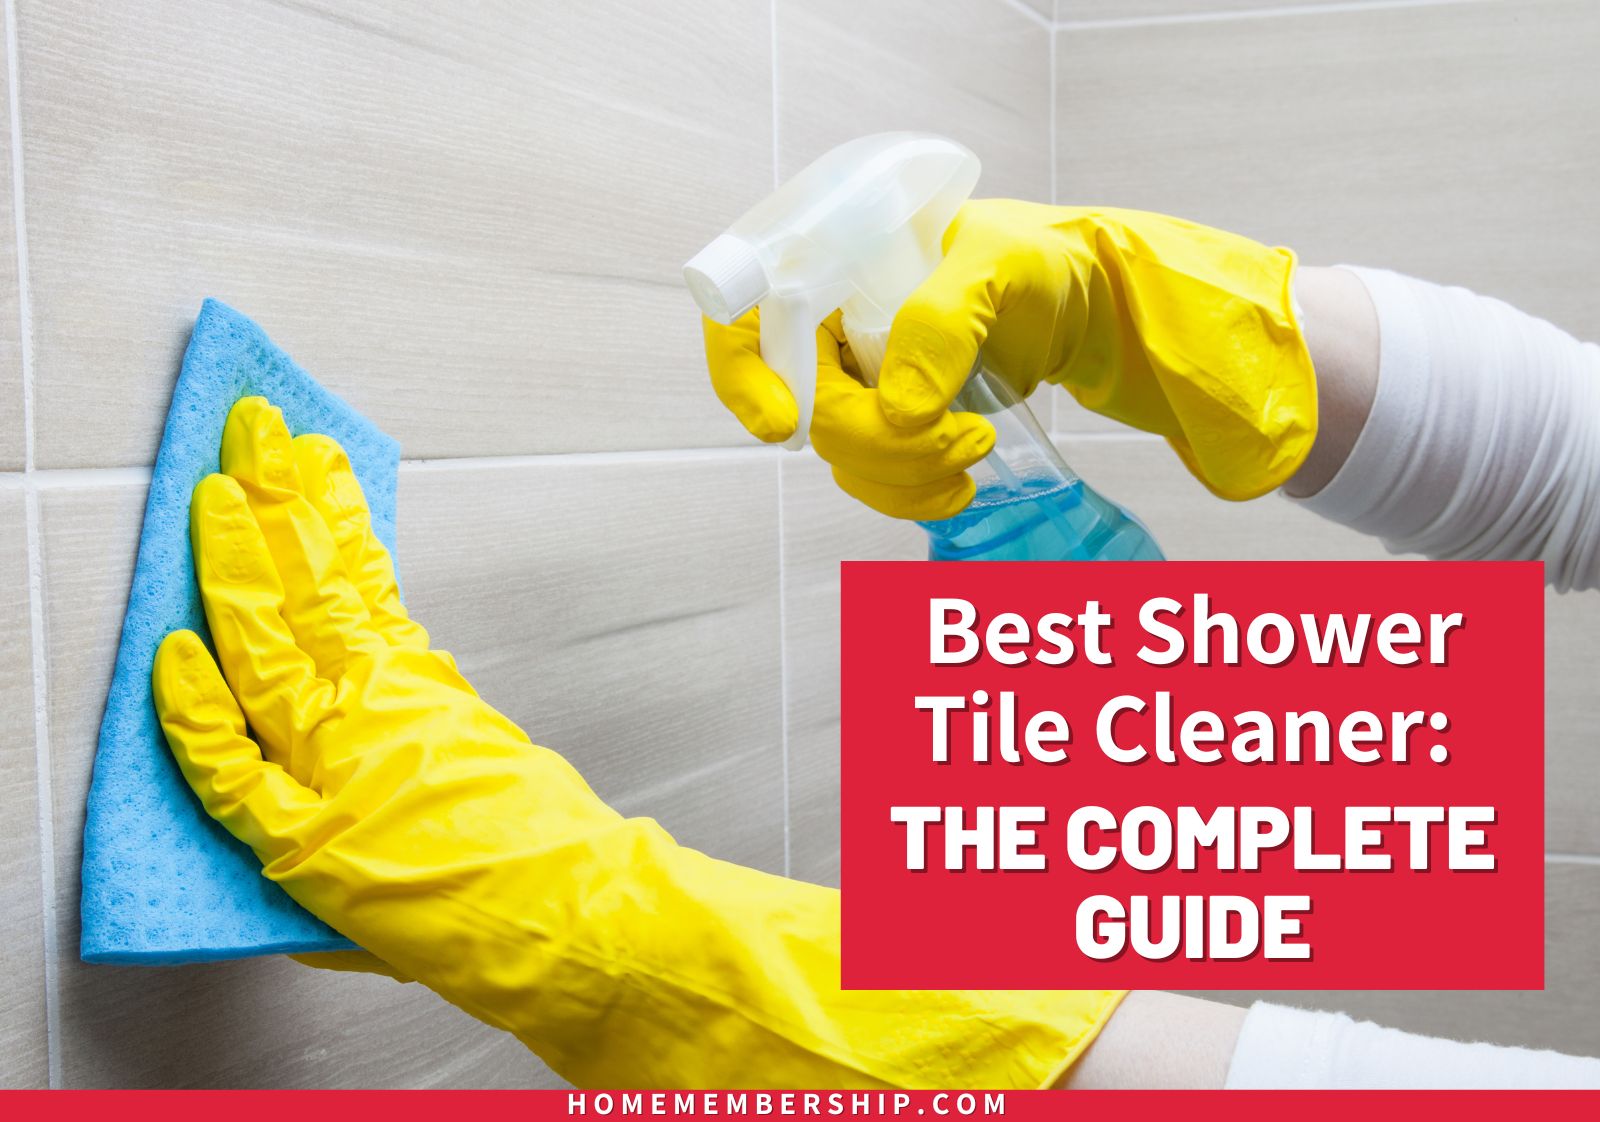 https://eadn-wc01-10084975.nxedge.io/wp-content/uploads/2023/08/Best-Shower-Tile-Cleaner-The-Complete-Guide.jpg